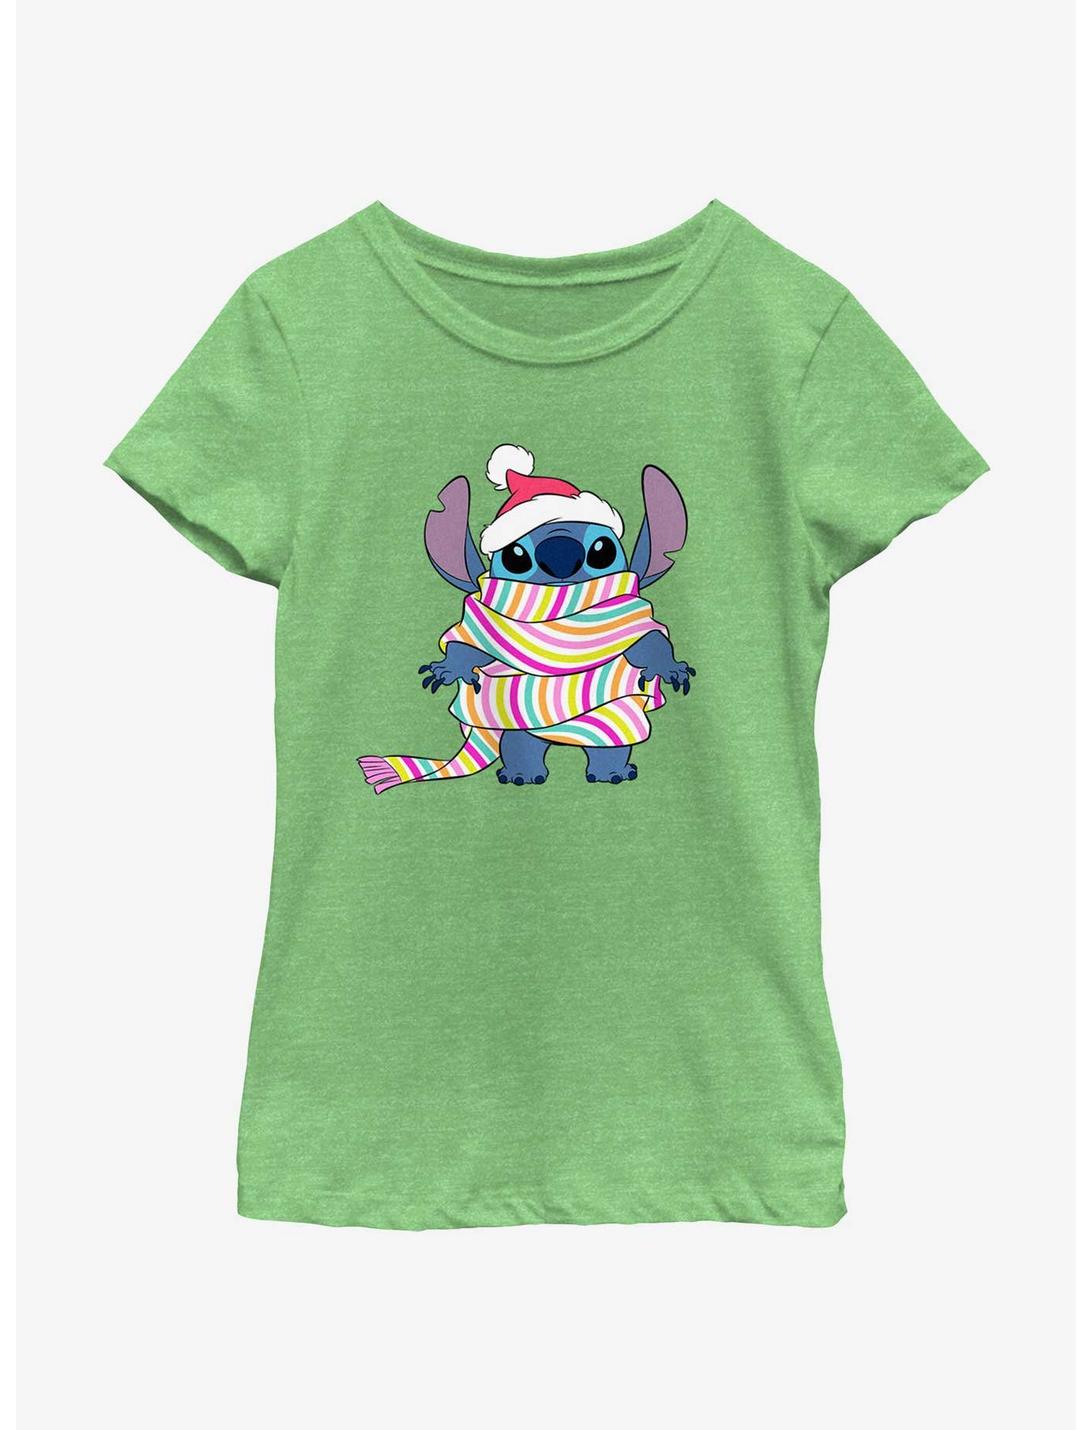 Disney Lilo & Stitch Wrapped In a Scarf Youth Girls T-Shirt, GRN APPLE, hi-res